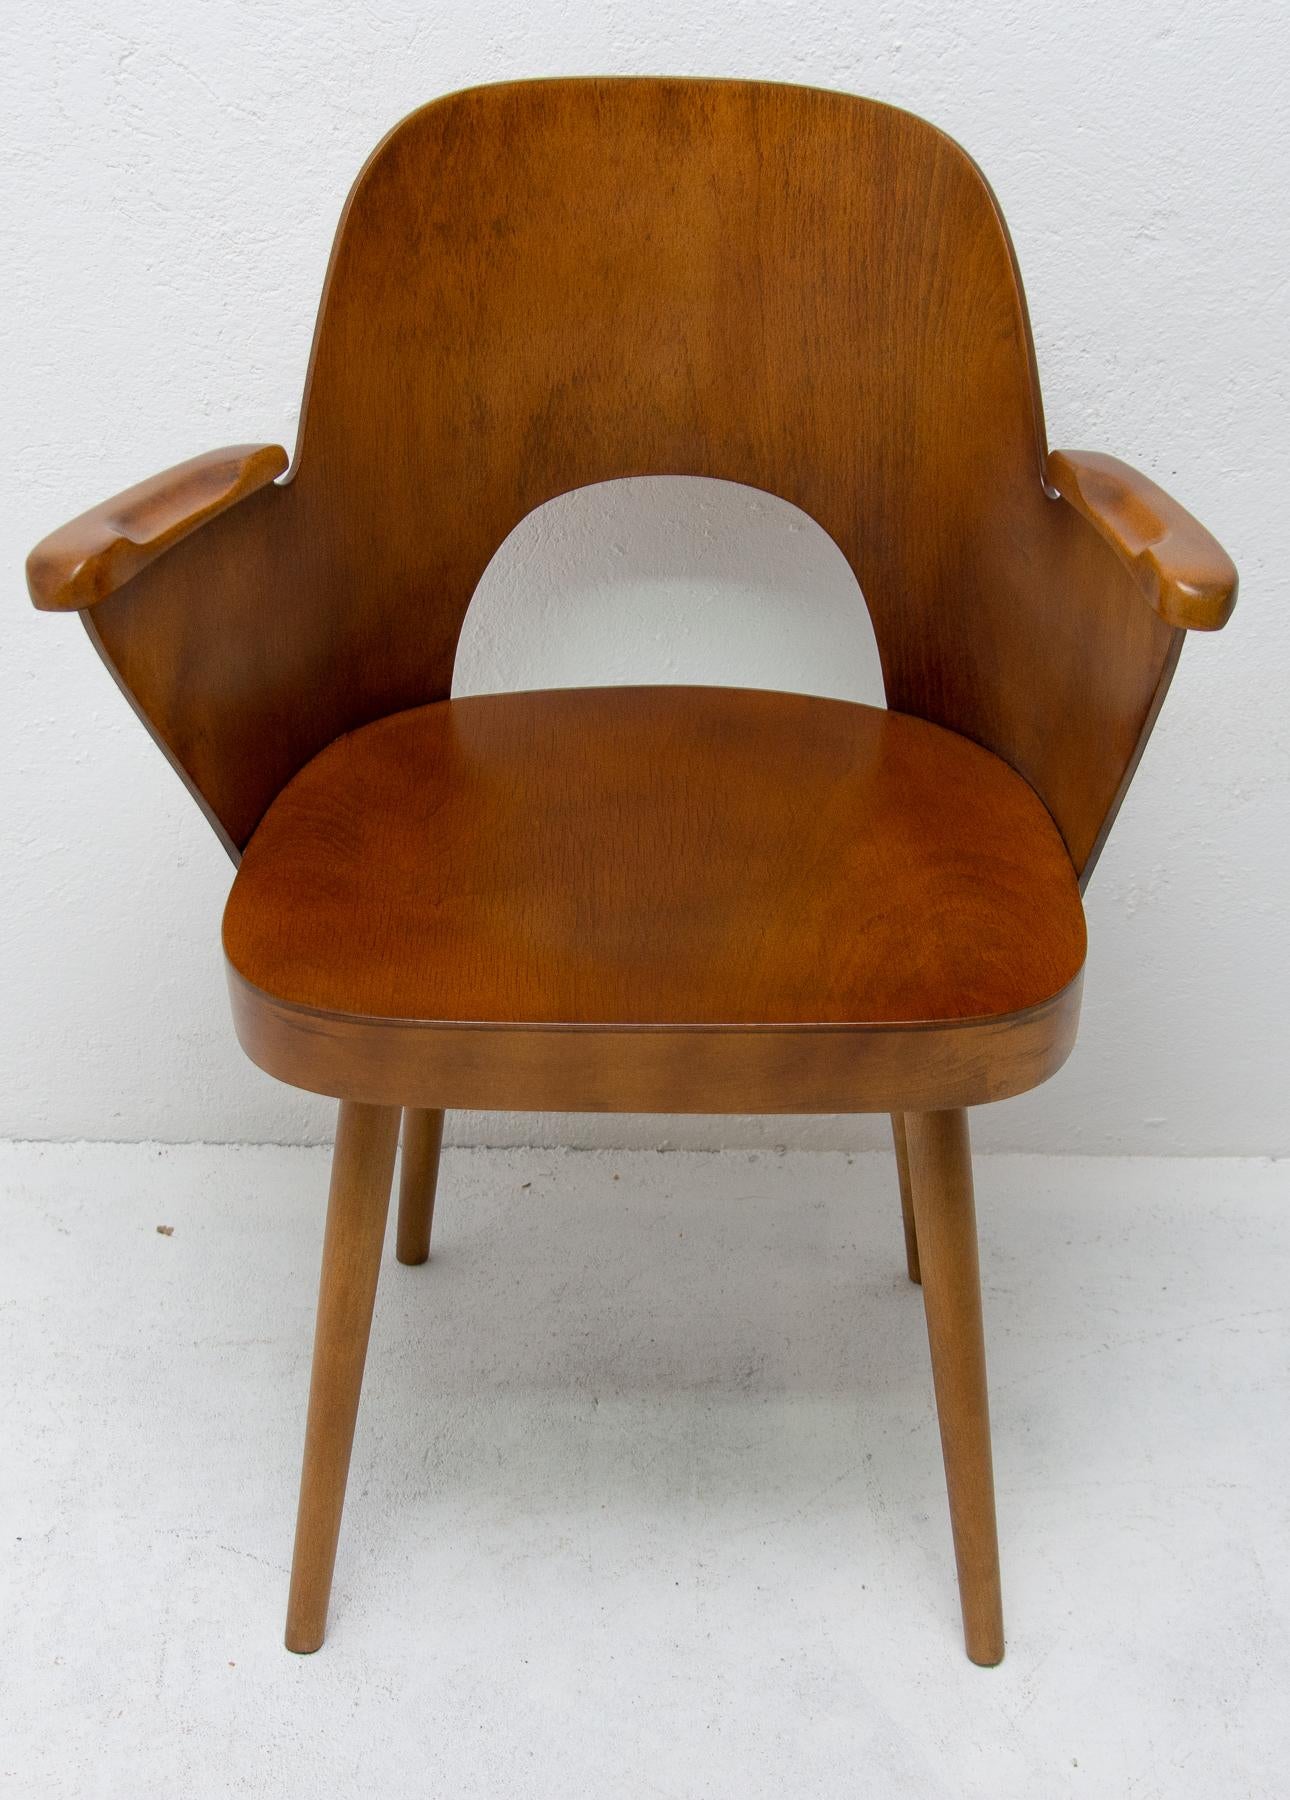 This writing desk armchair was designed by Austrian architect Oswald Haerdtl. The chair is made from beech and bent plywood and was made in the 1960s. It´s in very good condition.